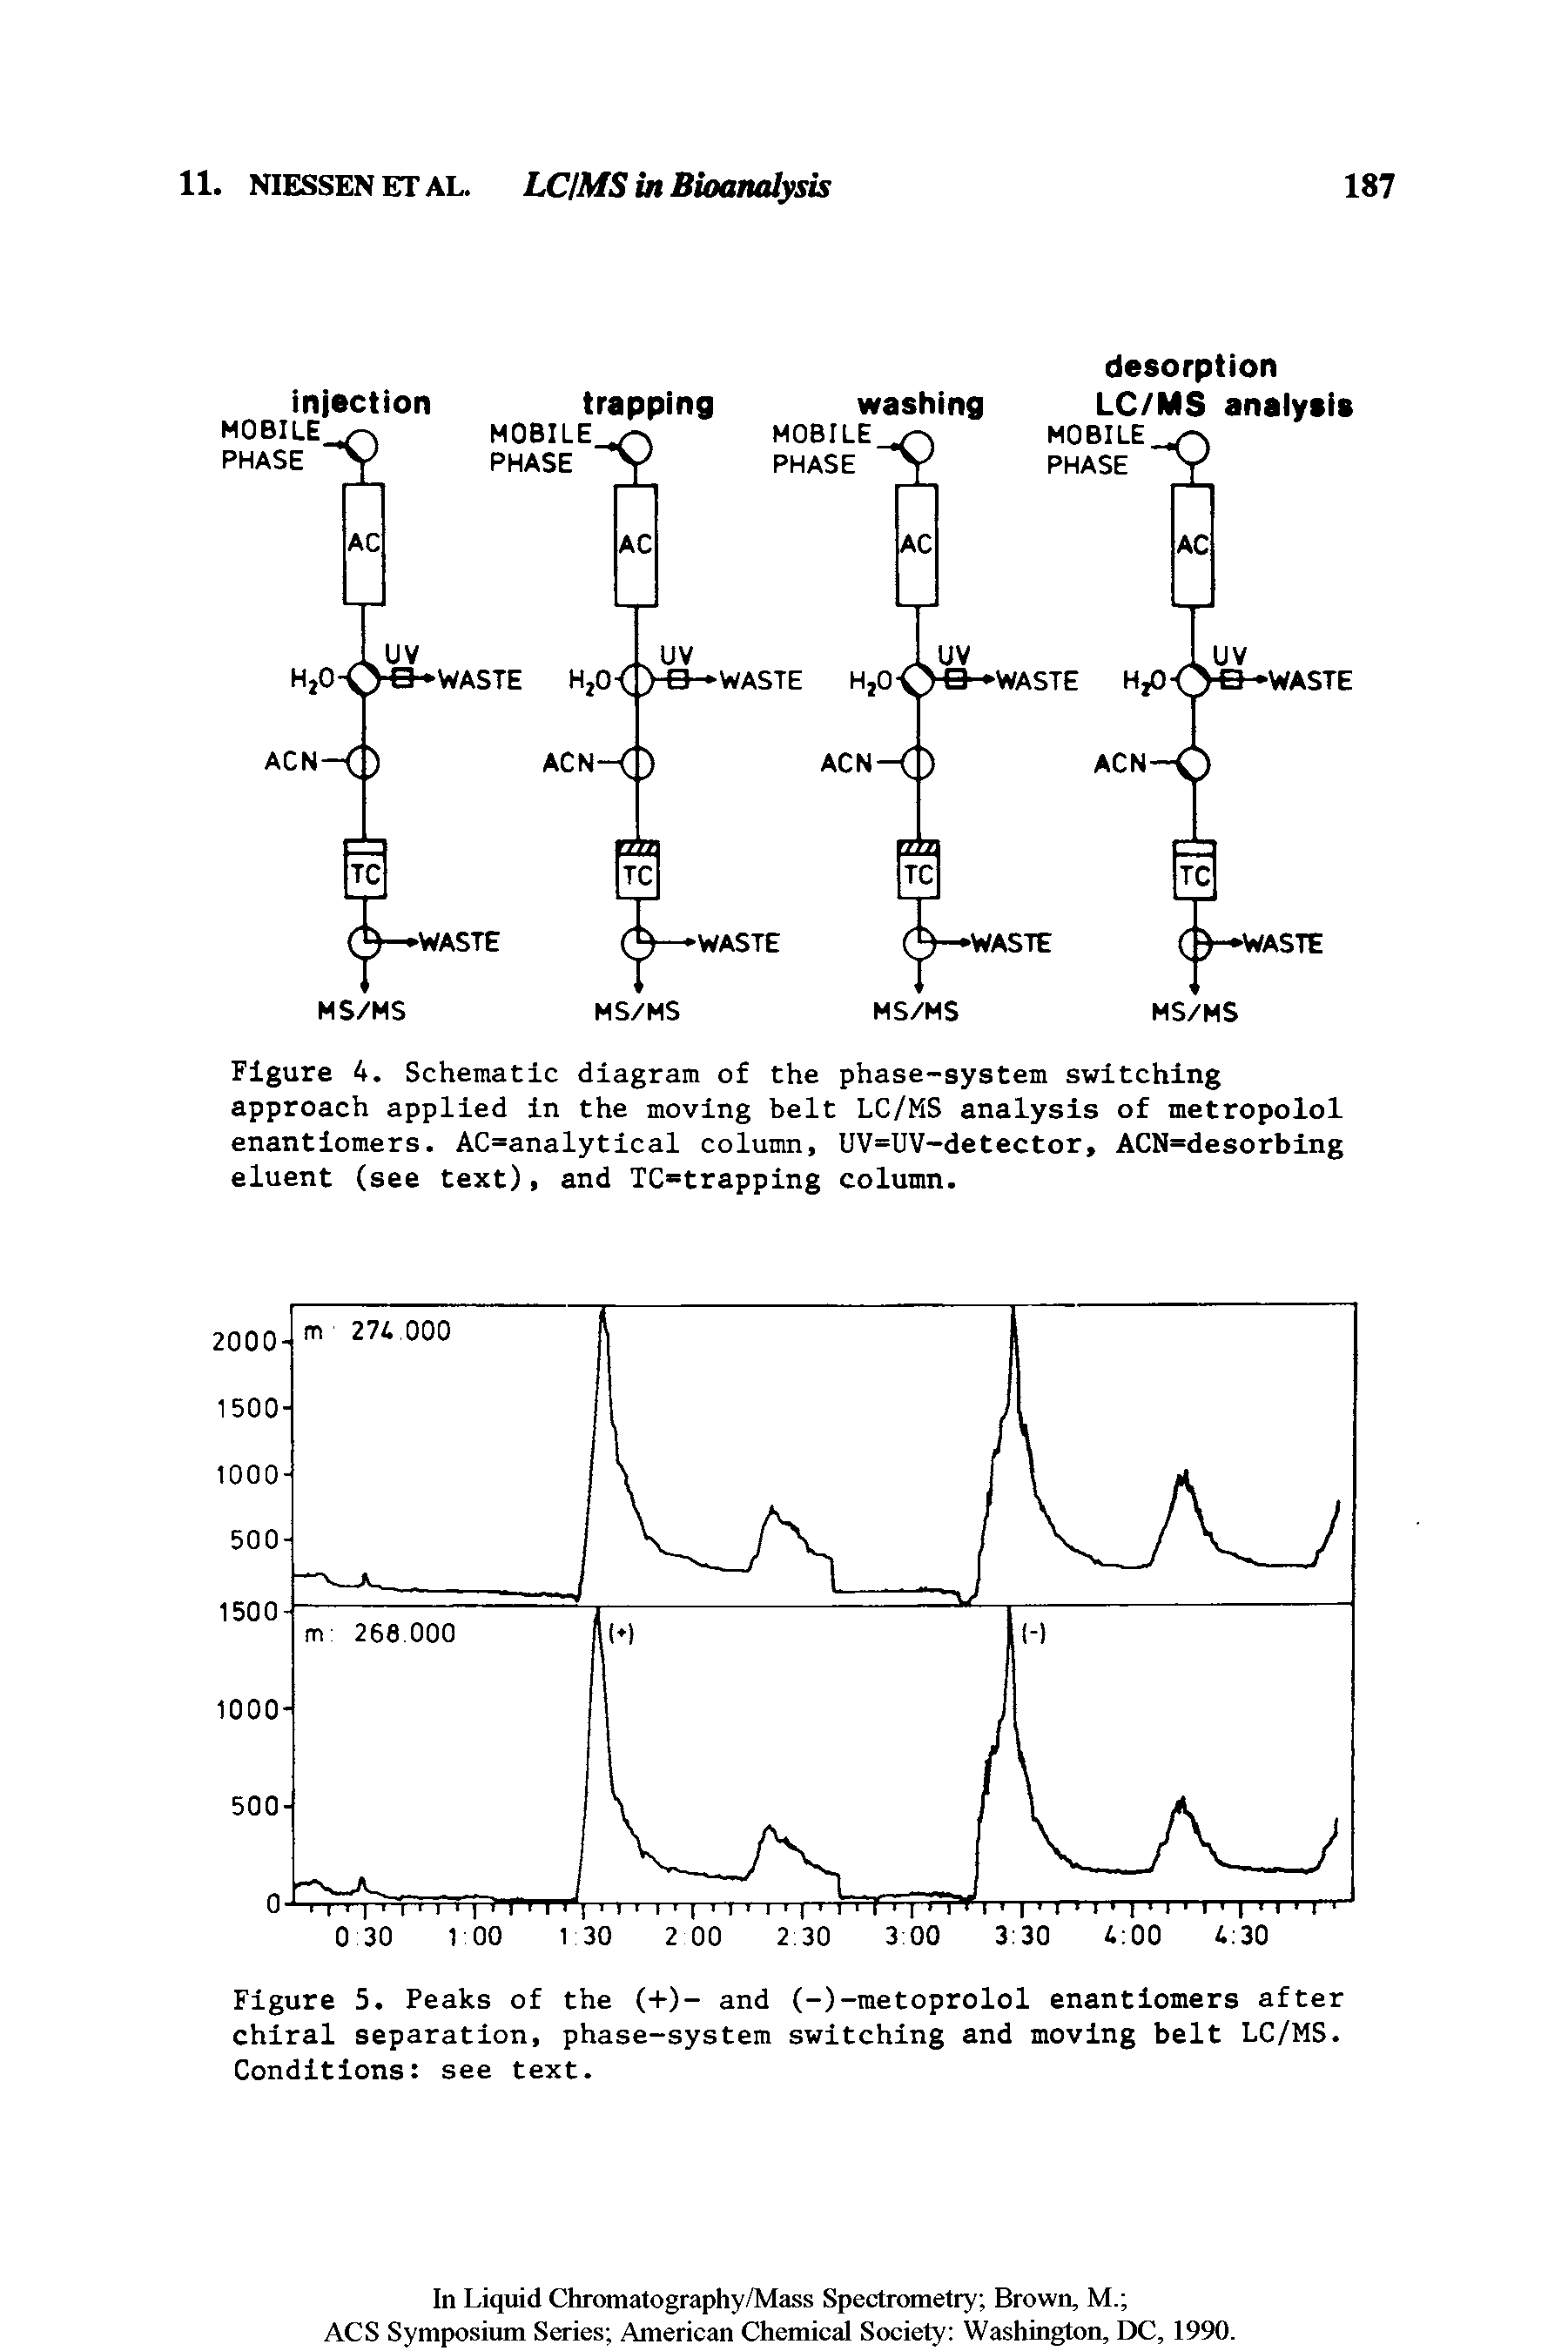 Figure 5. Peaks of the (+)- and (-)-metoprolol enantiomers after chiral separation, phase-system switching and moving belt LC/MS. Conditions see text.